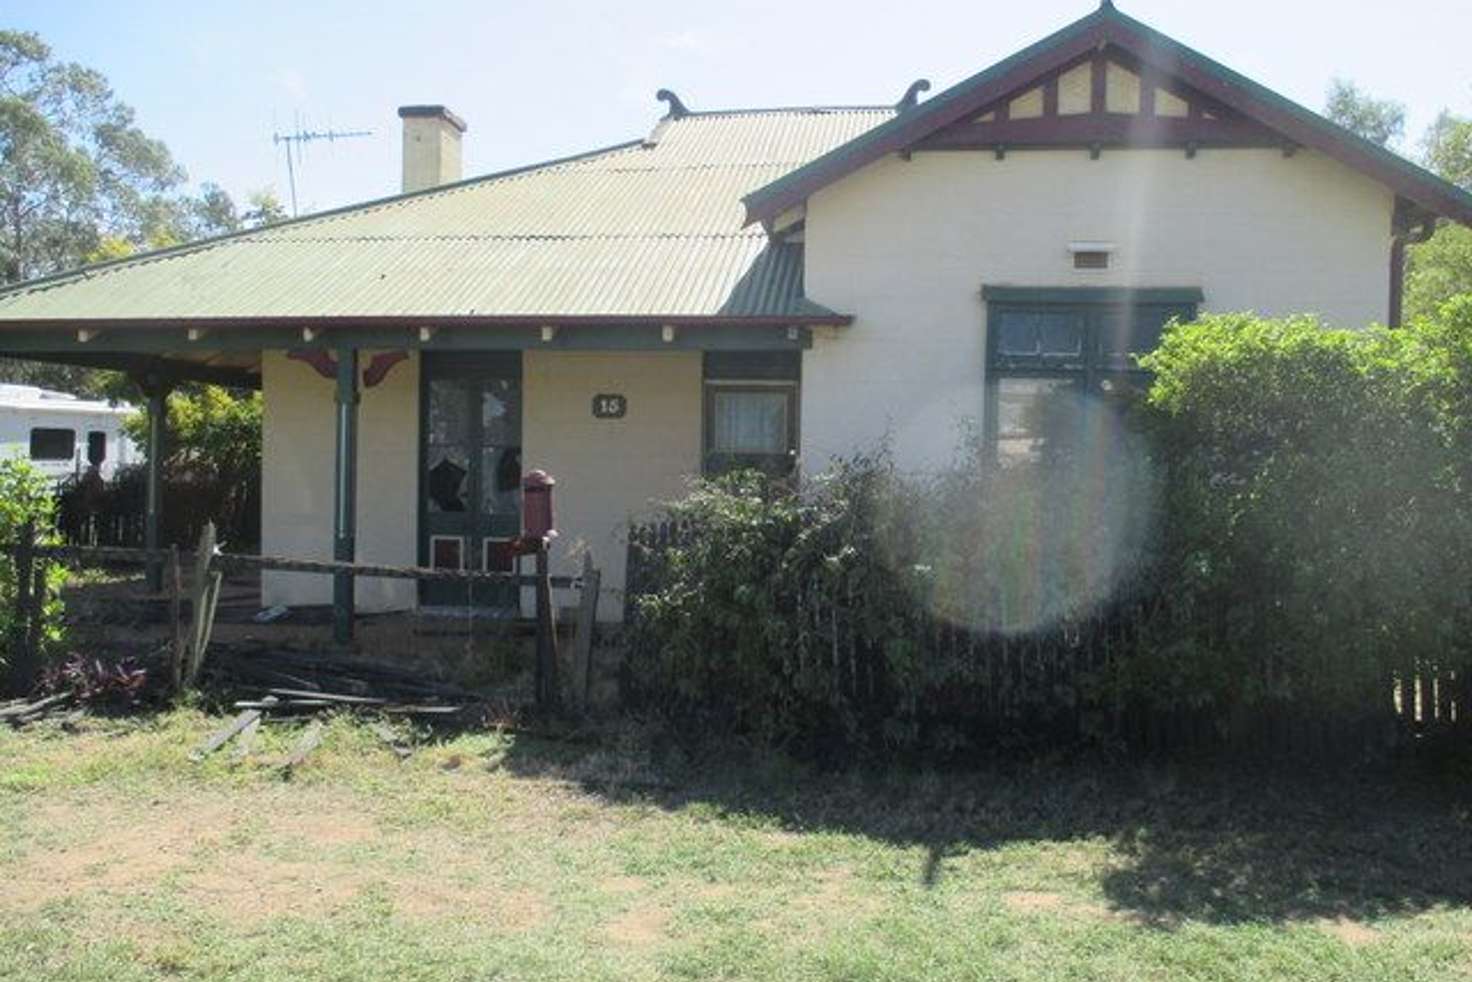 Main view of Homely house listing, 15 Eurimie Street, Coonamble NSW 2829